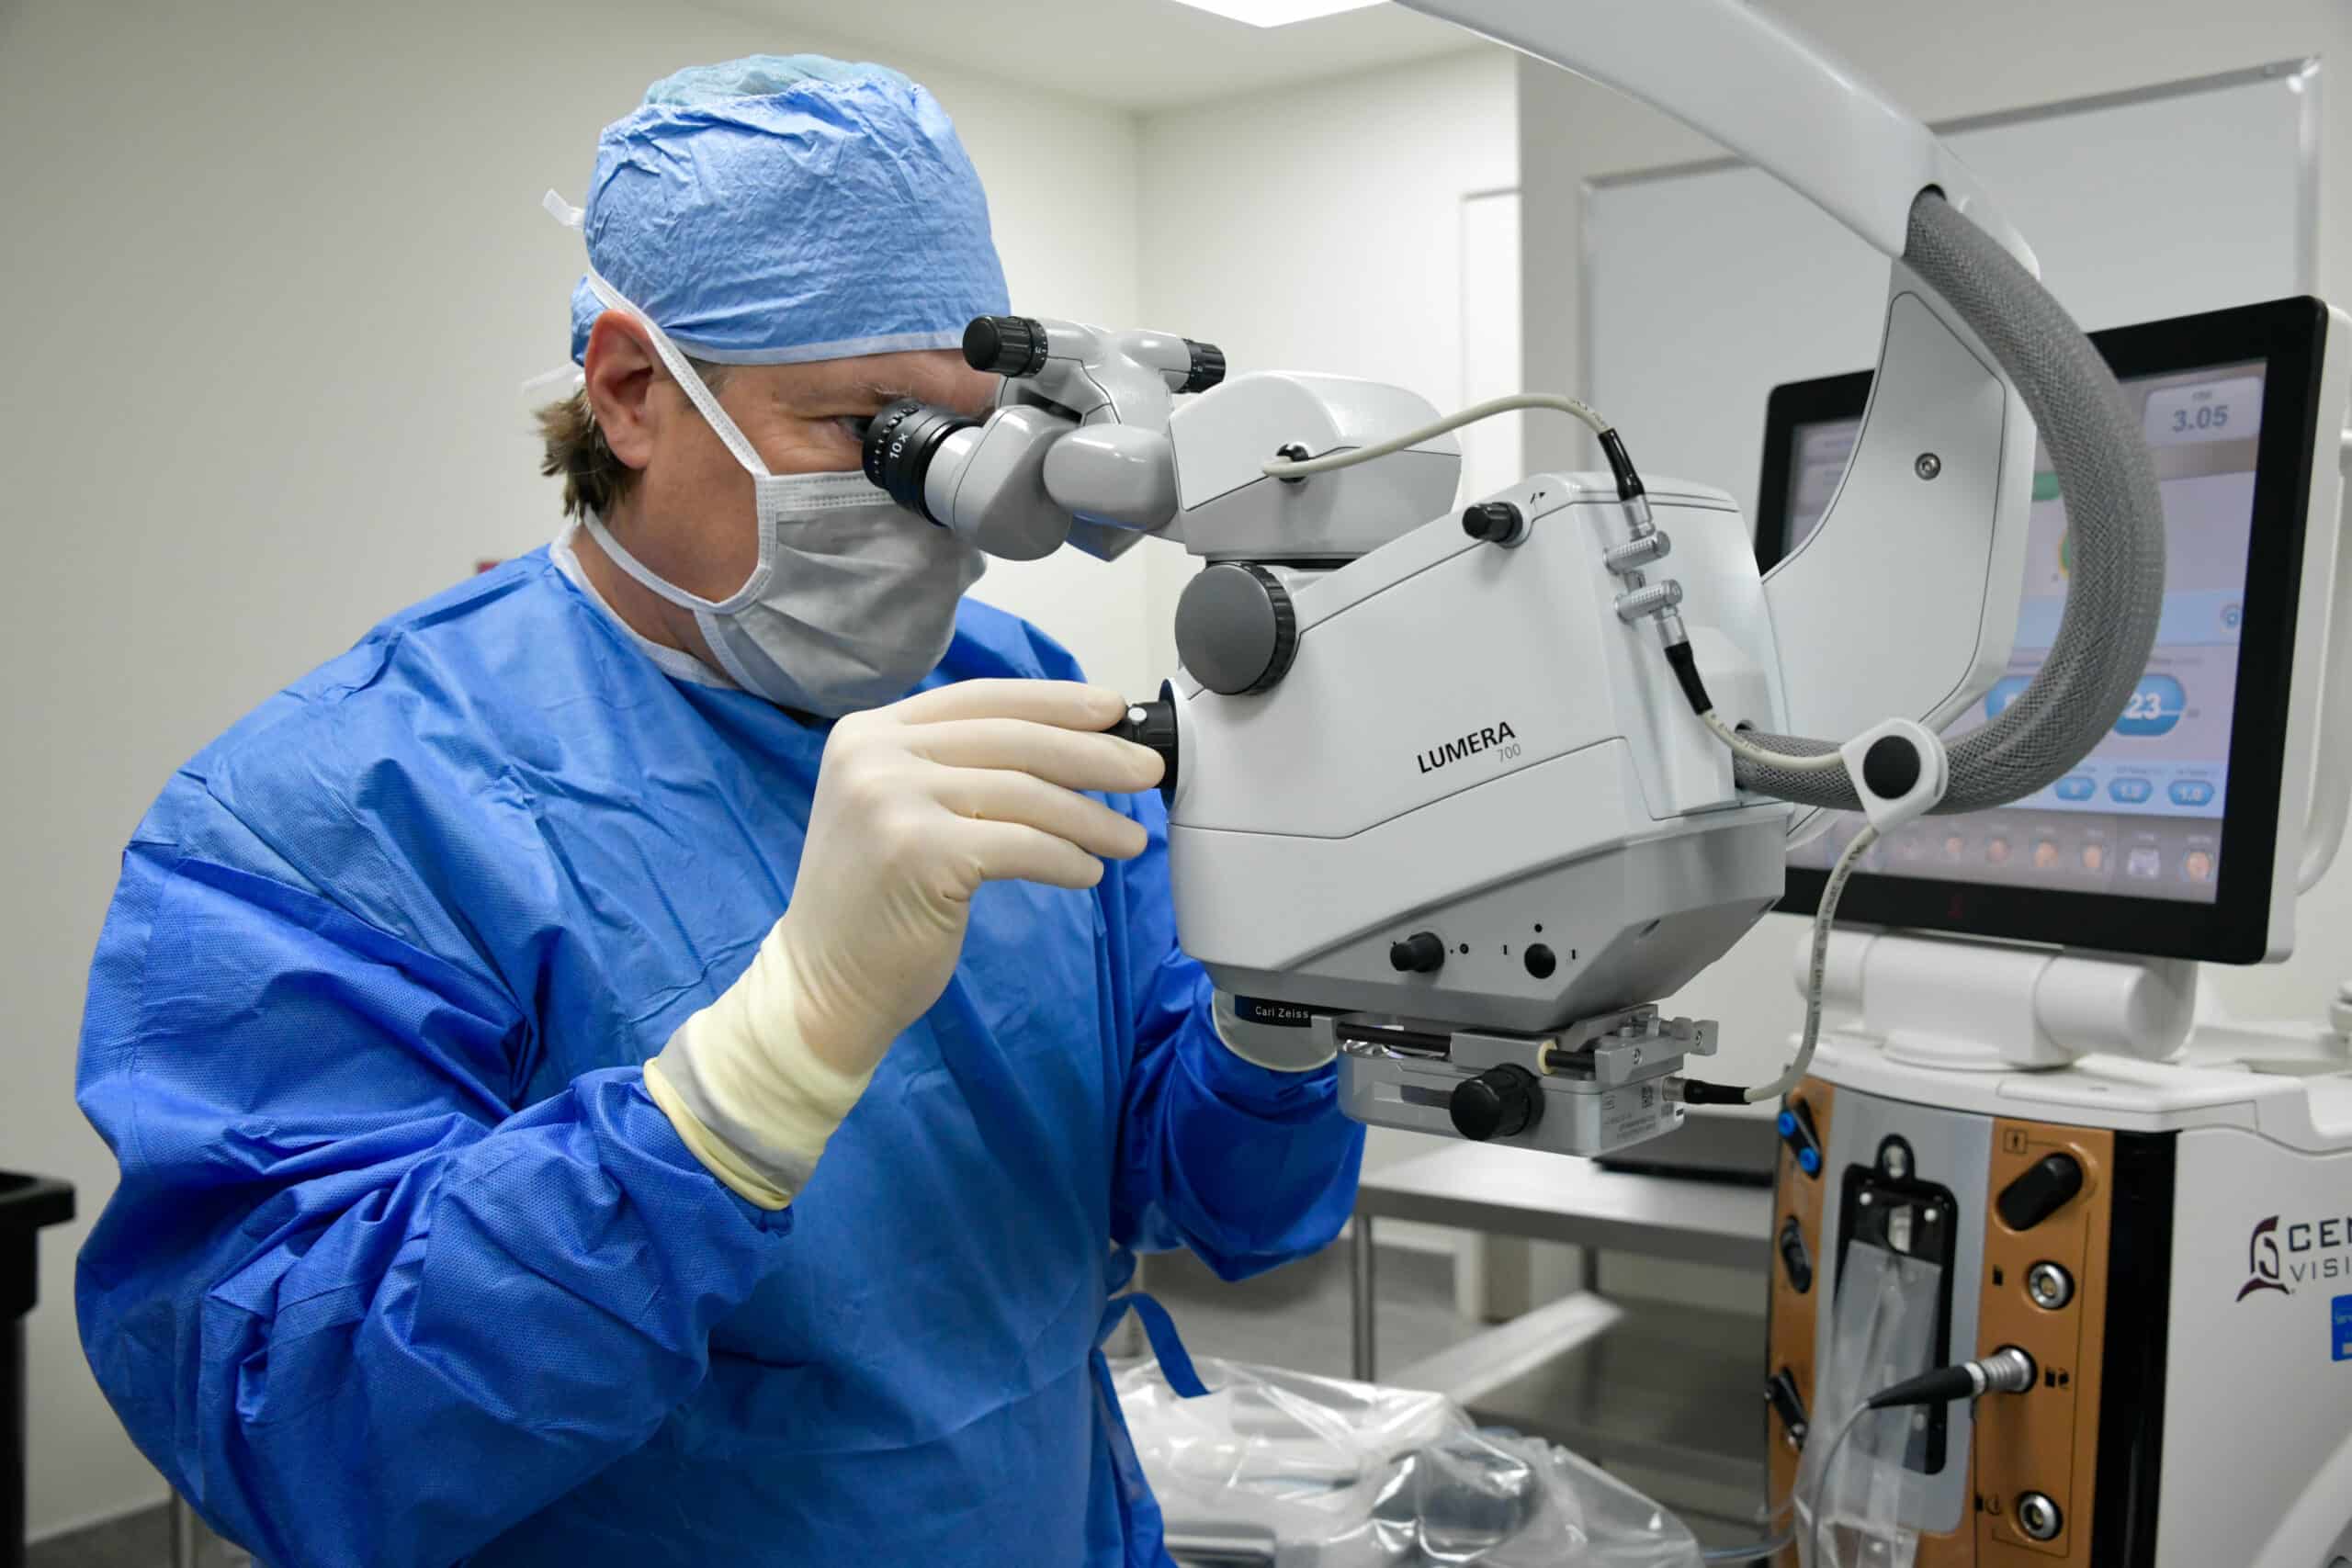 RVH partners with Barrie Lasik Centre to perform cataract surgeries off-site